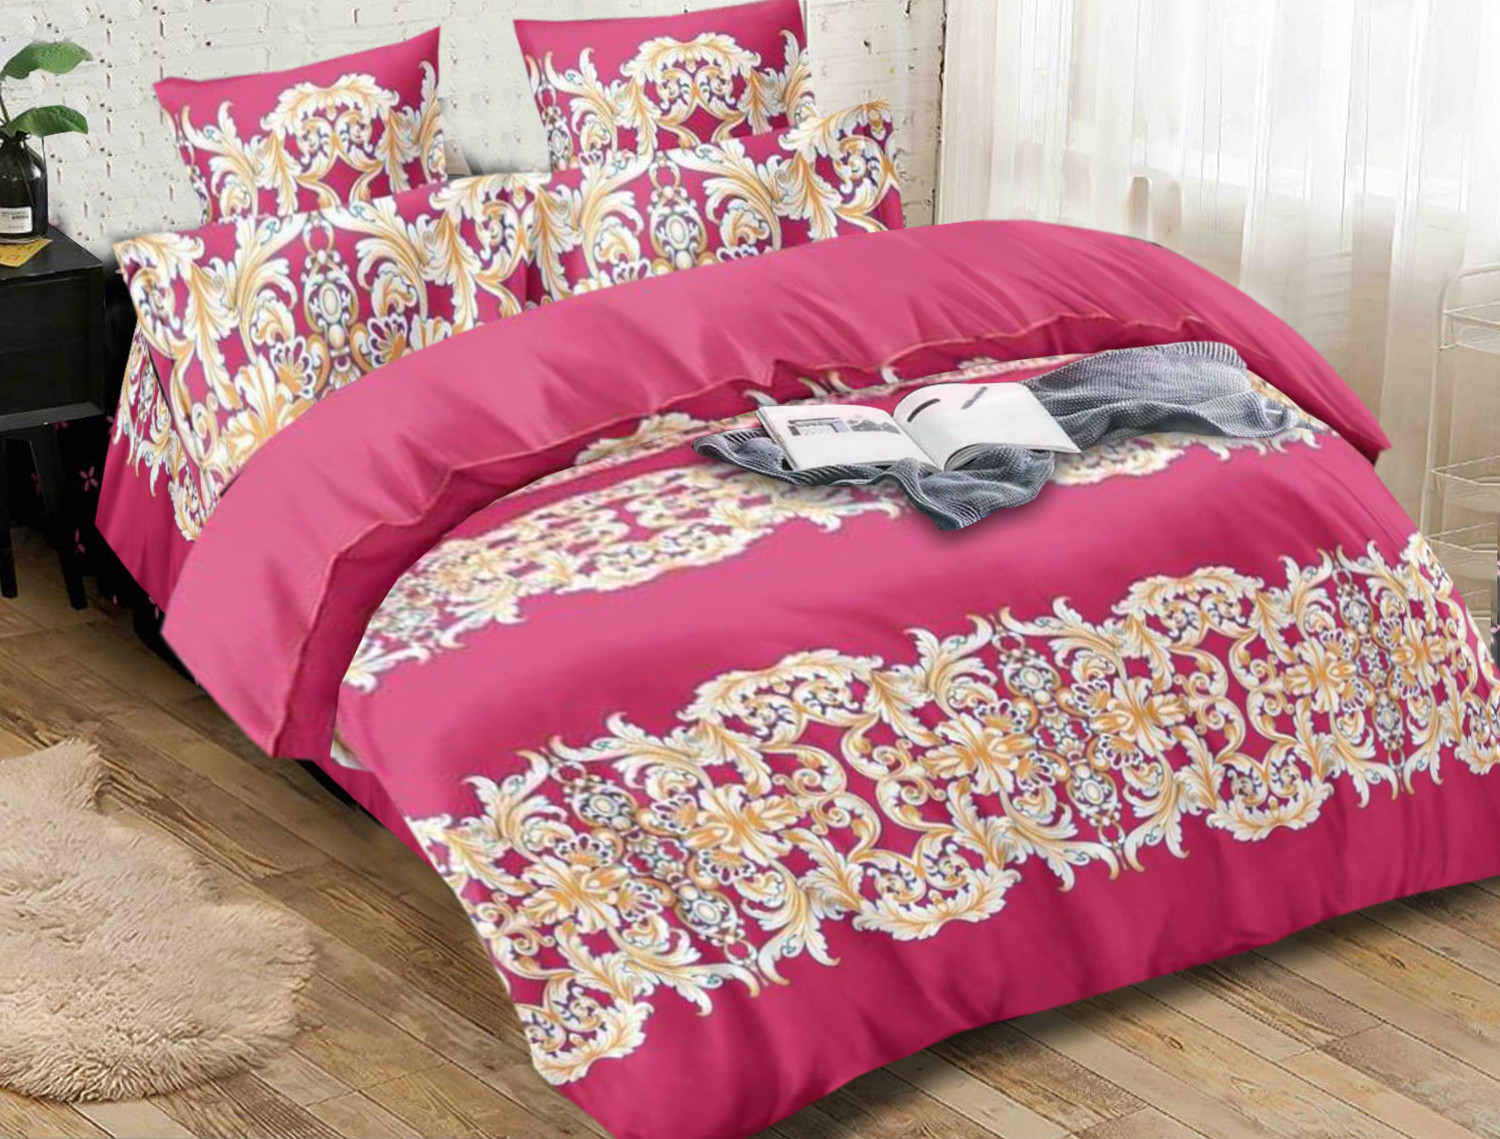 Kuber Industries Damask Print Glace Cotton Double Bedsheet with 2 Pillow Covers (Pink)